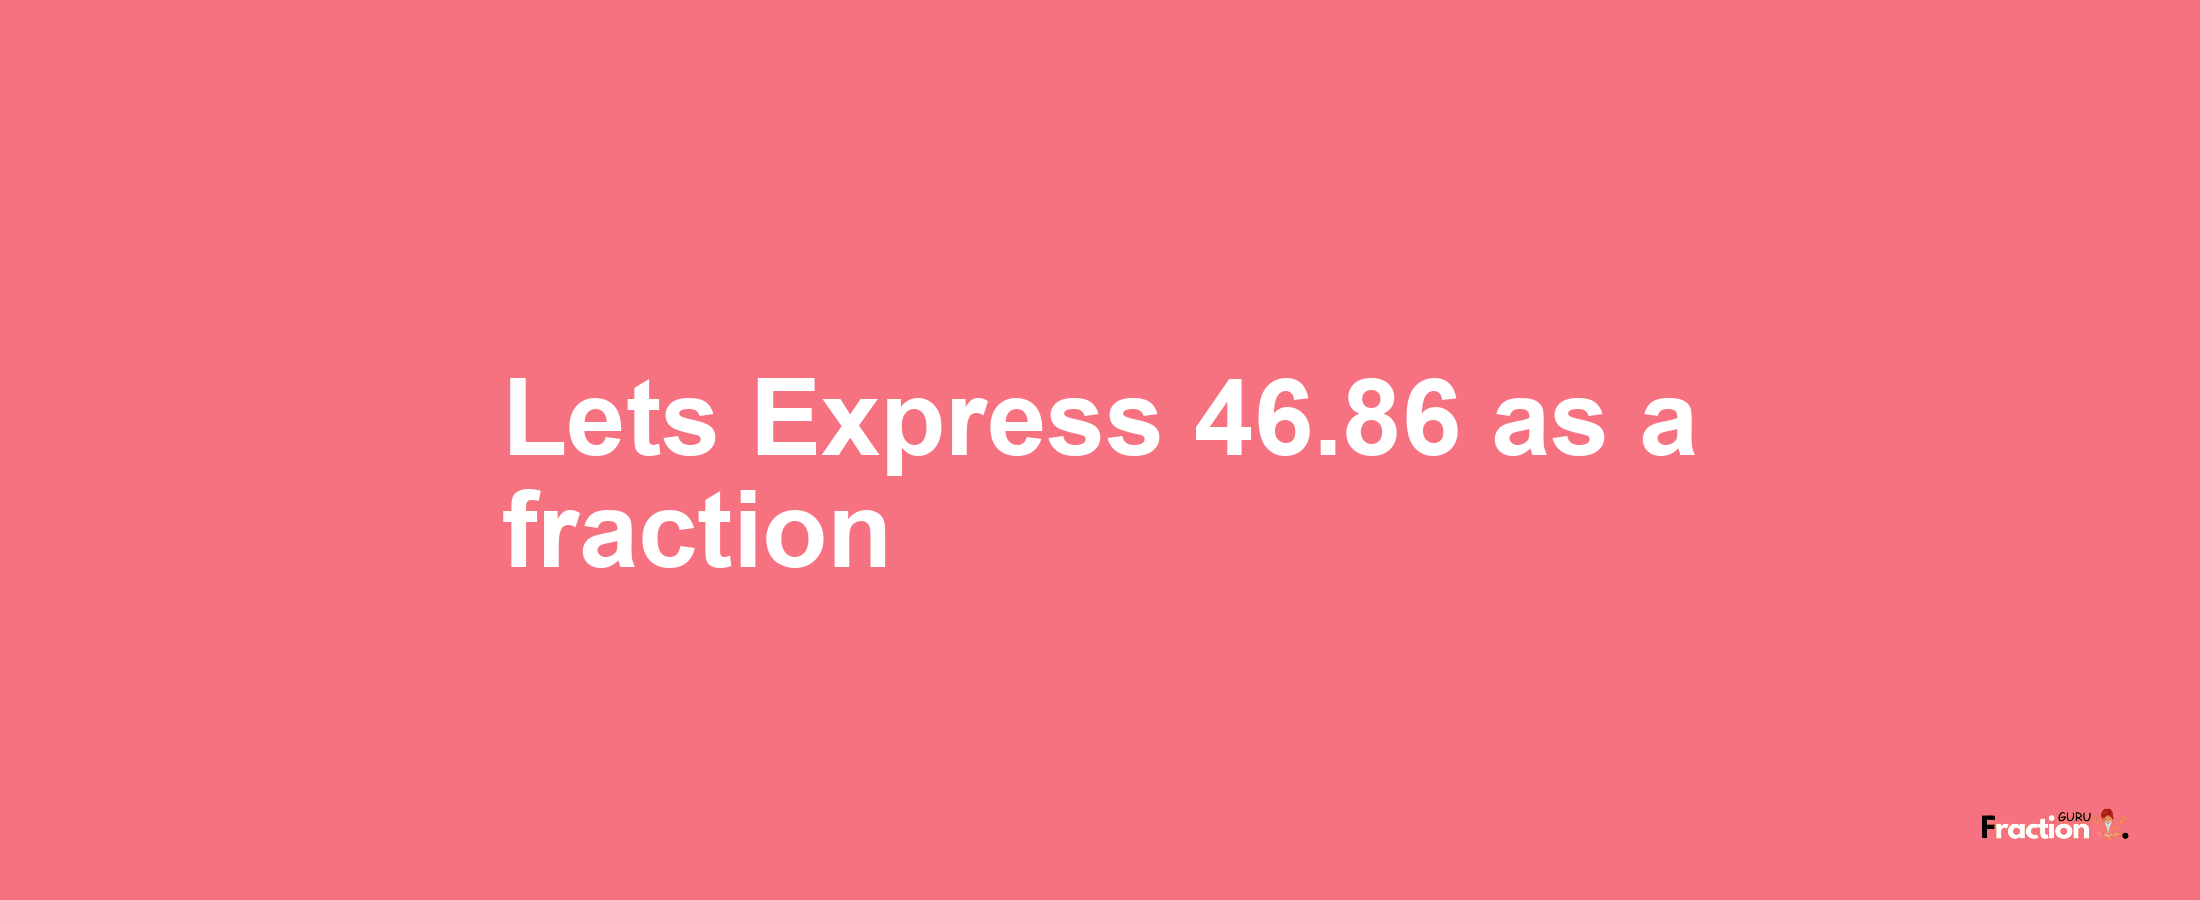 Lets Express 46.86 as afraction